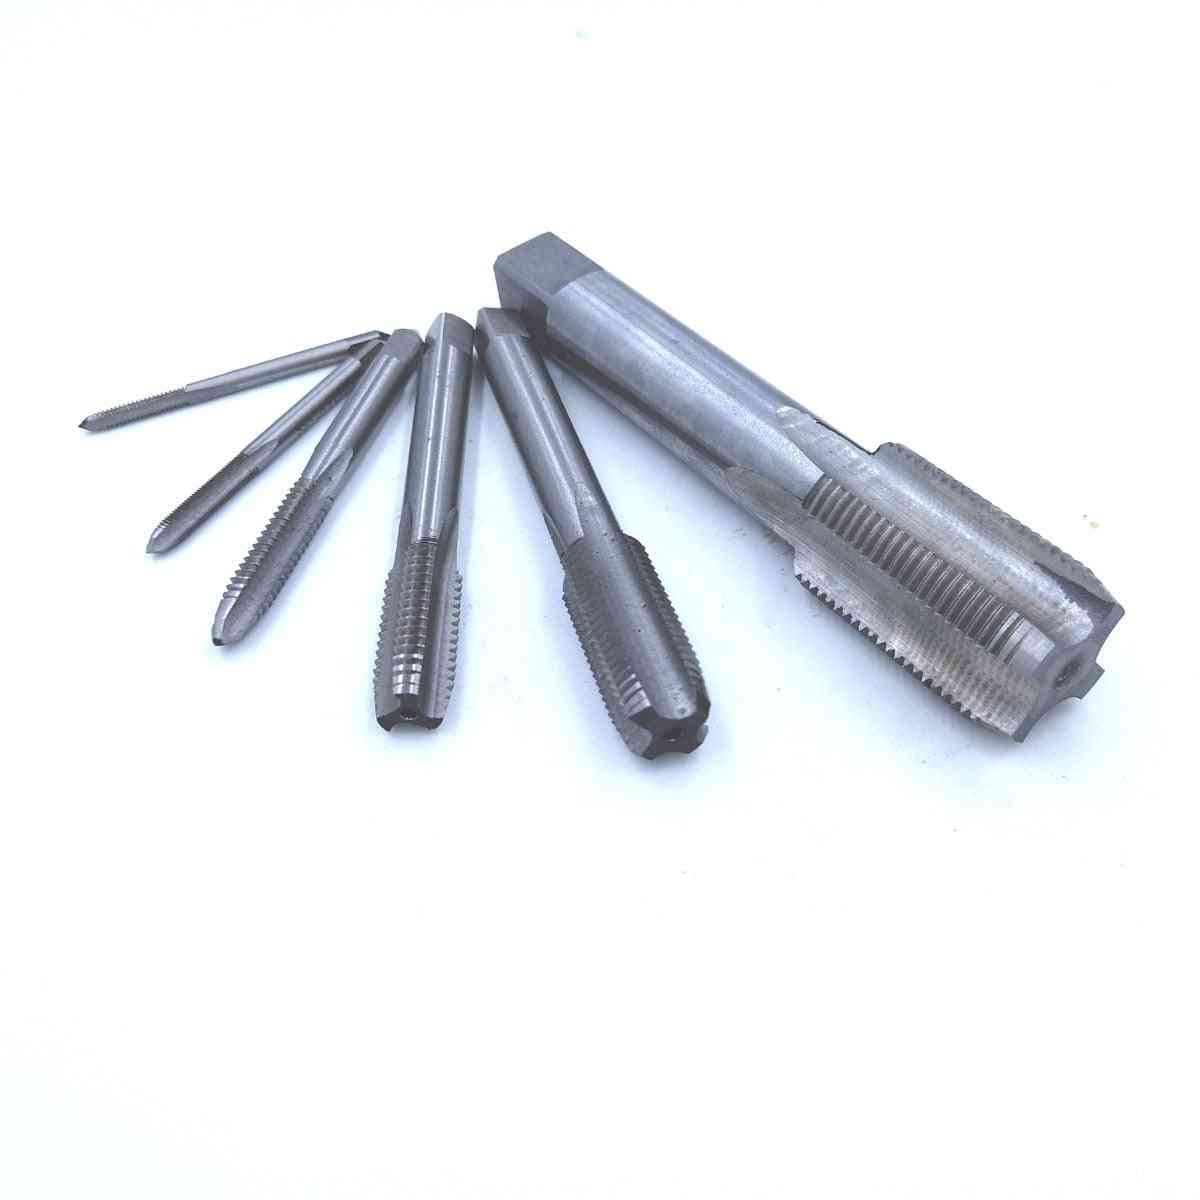 Metric Hss Left Hand Tap Pitch Threading Tools For Mold Machining Lh